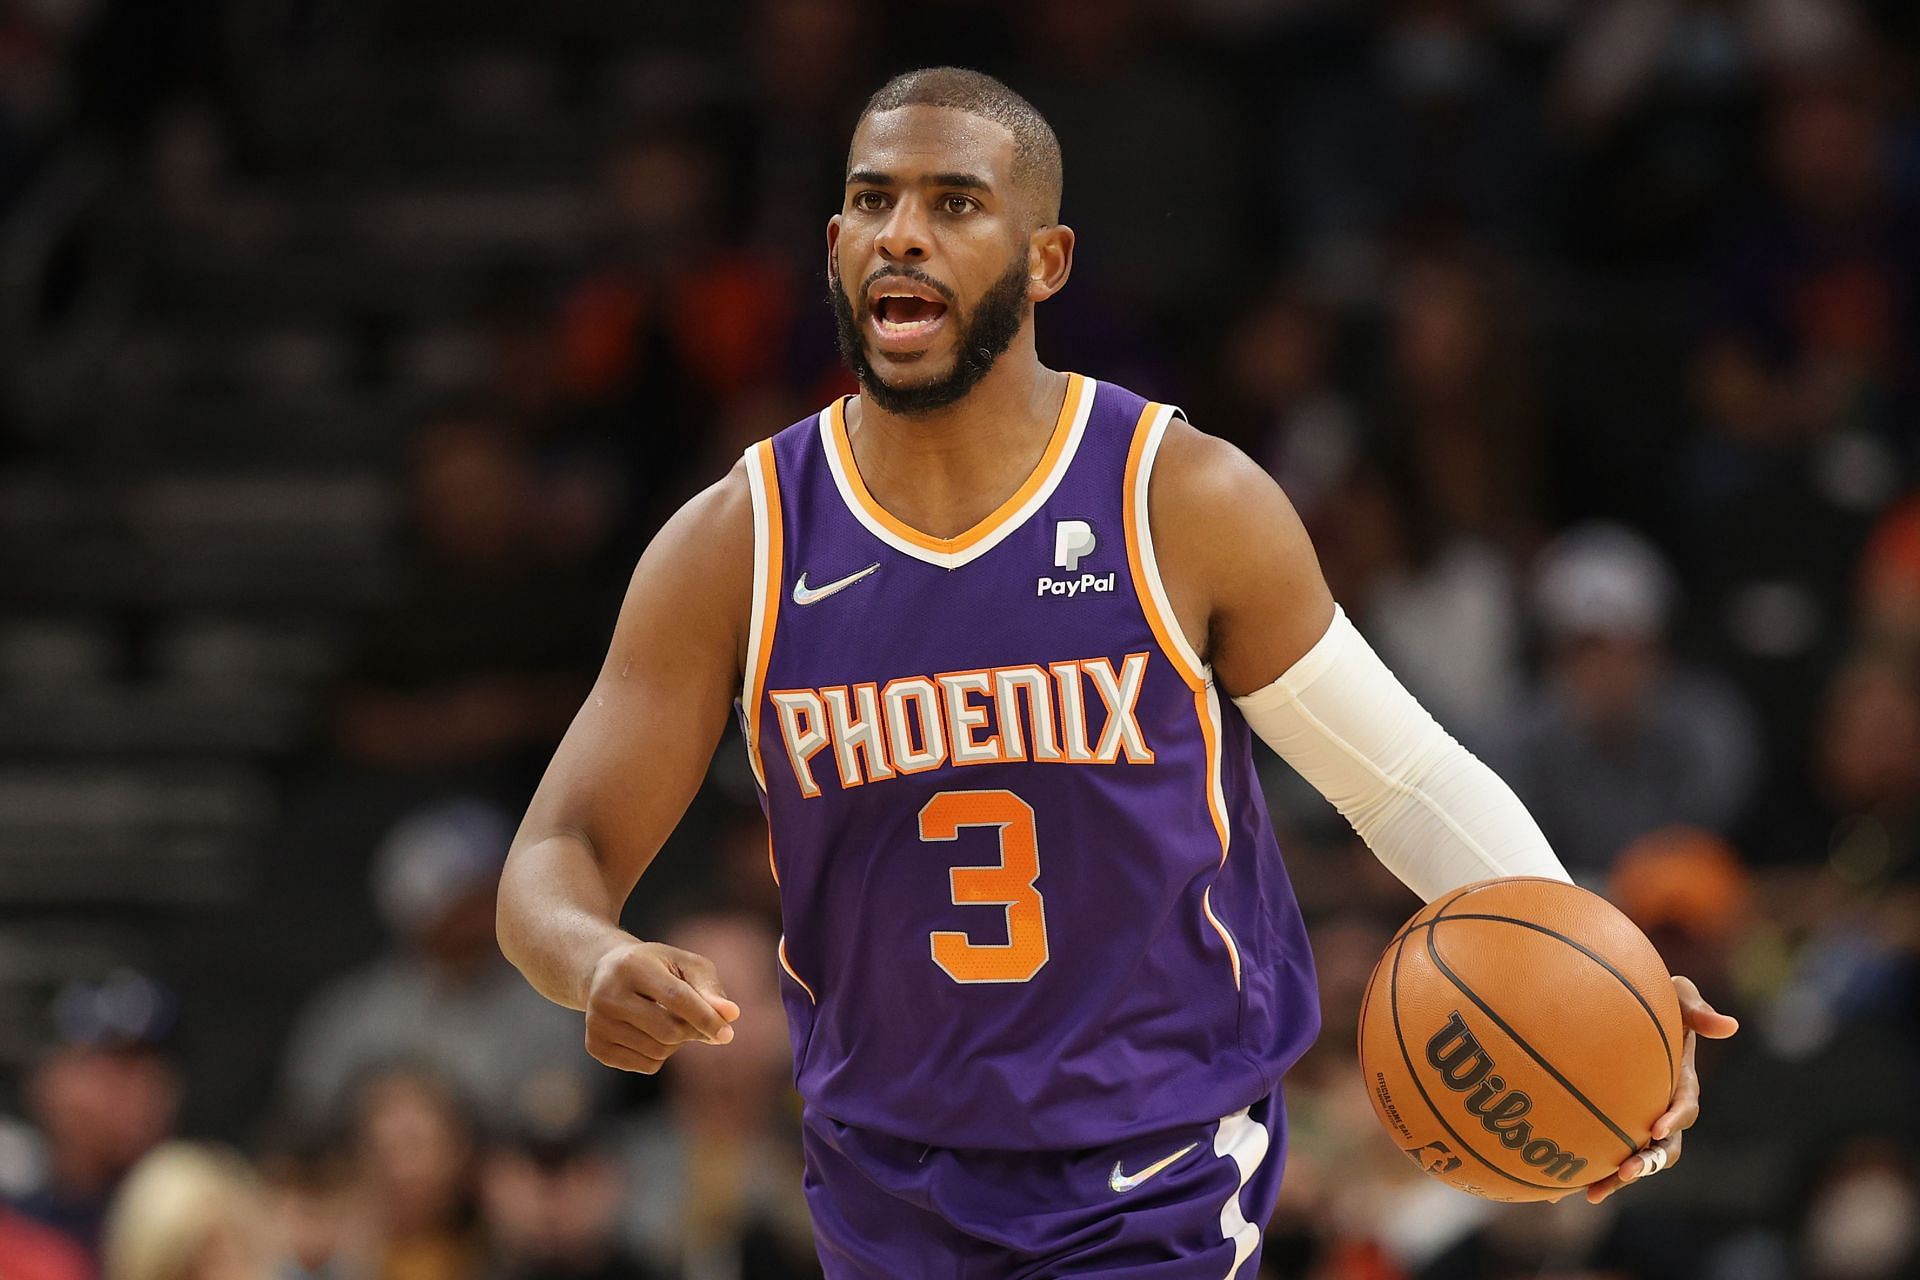 Chris Paul of the Phoenix Suns in action during a game